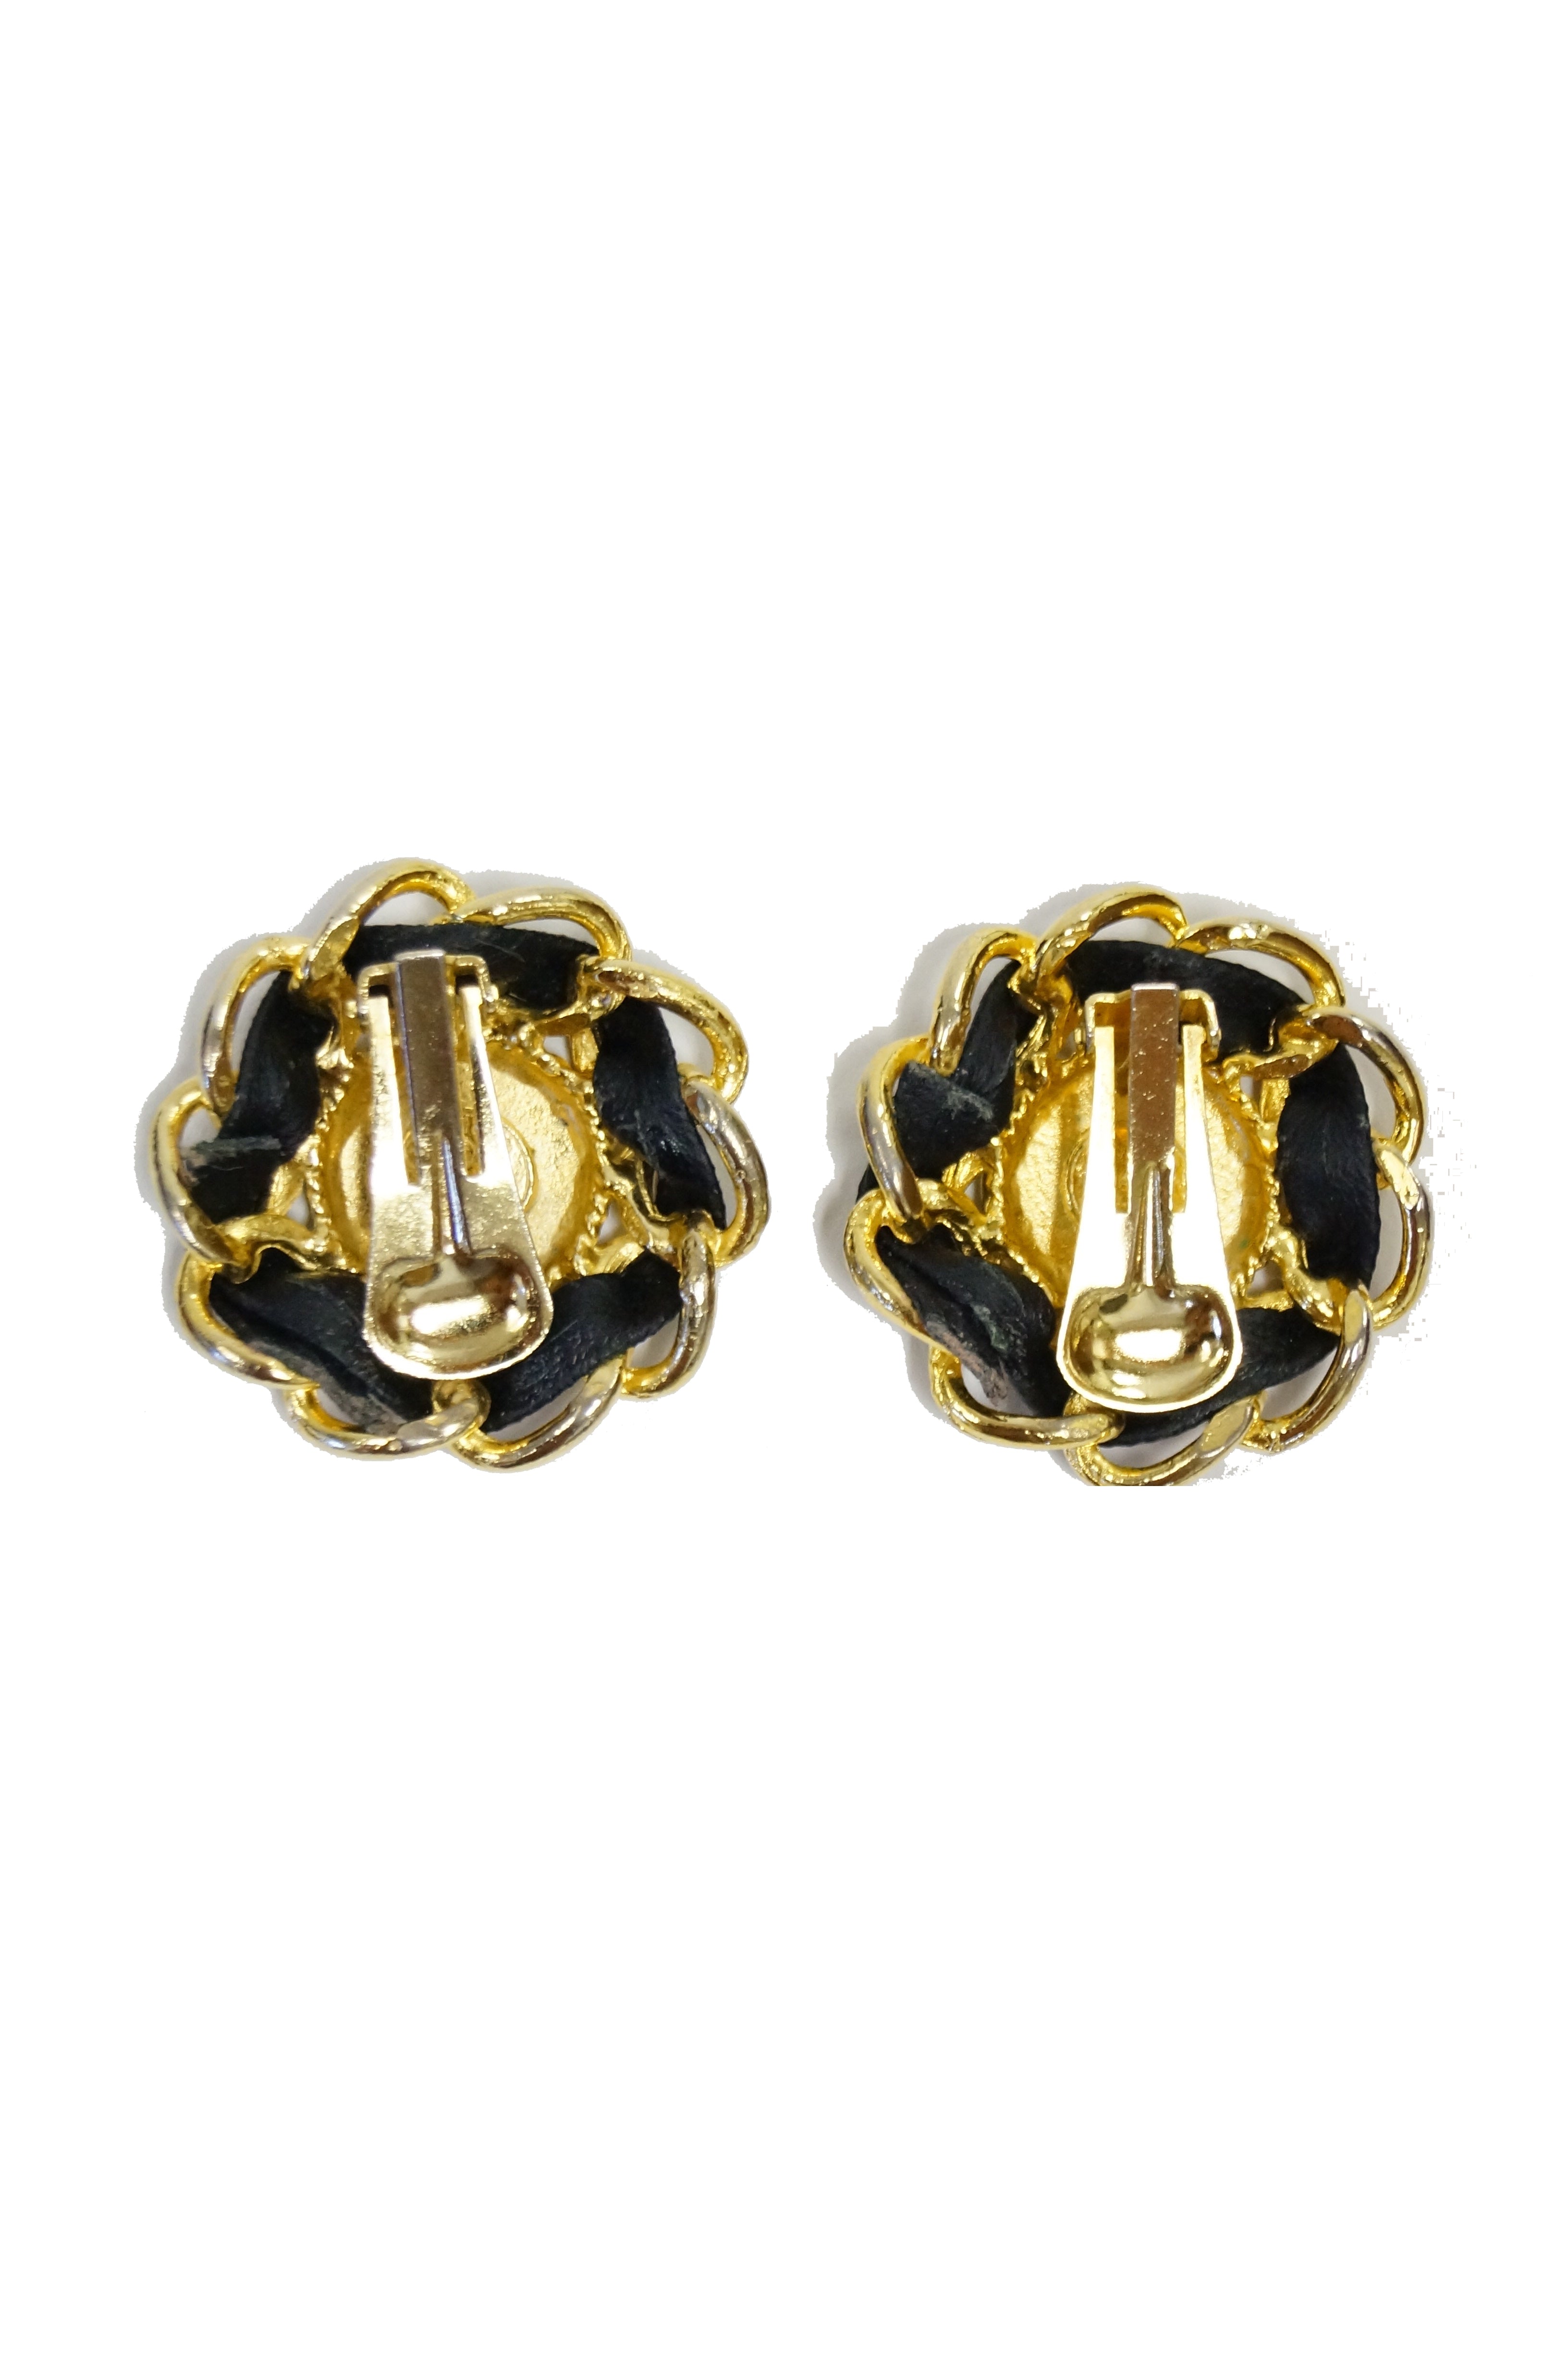 Italian Paolo Gucci famous brand antique classic pearl twist gold Clip-On  clip earrings - Shop Vintage Jewelry Kiosk Earrings & Clip-ons - Pinkoi